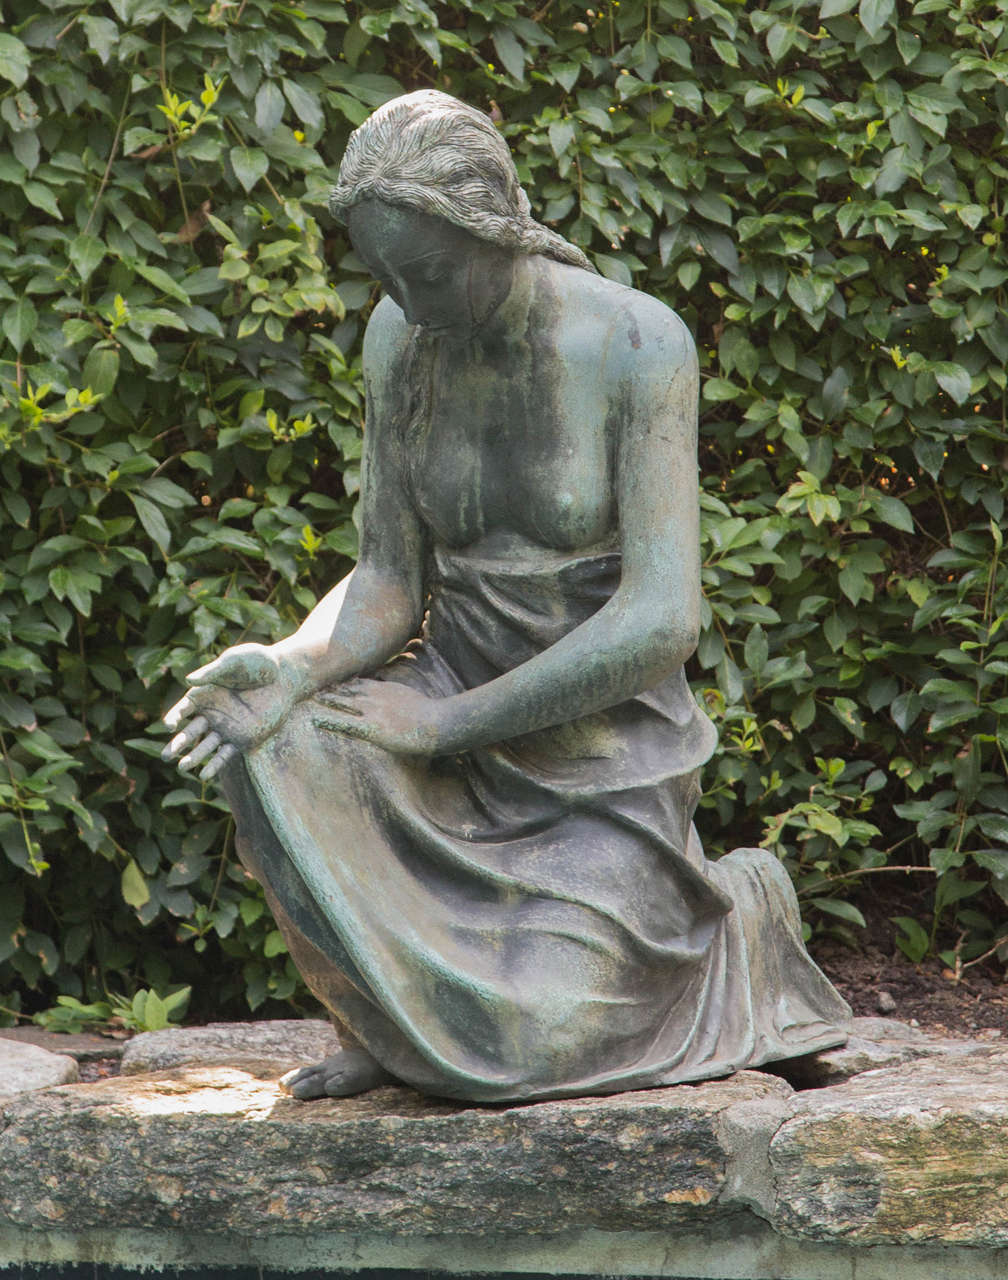 An unusual bronze figure in the Arts and Crafts style depicting a partially draped young woman kneeling on one knee with right hand open. The figure, with downward, reflective gaze, is meant to be placed at the edge of a pool.